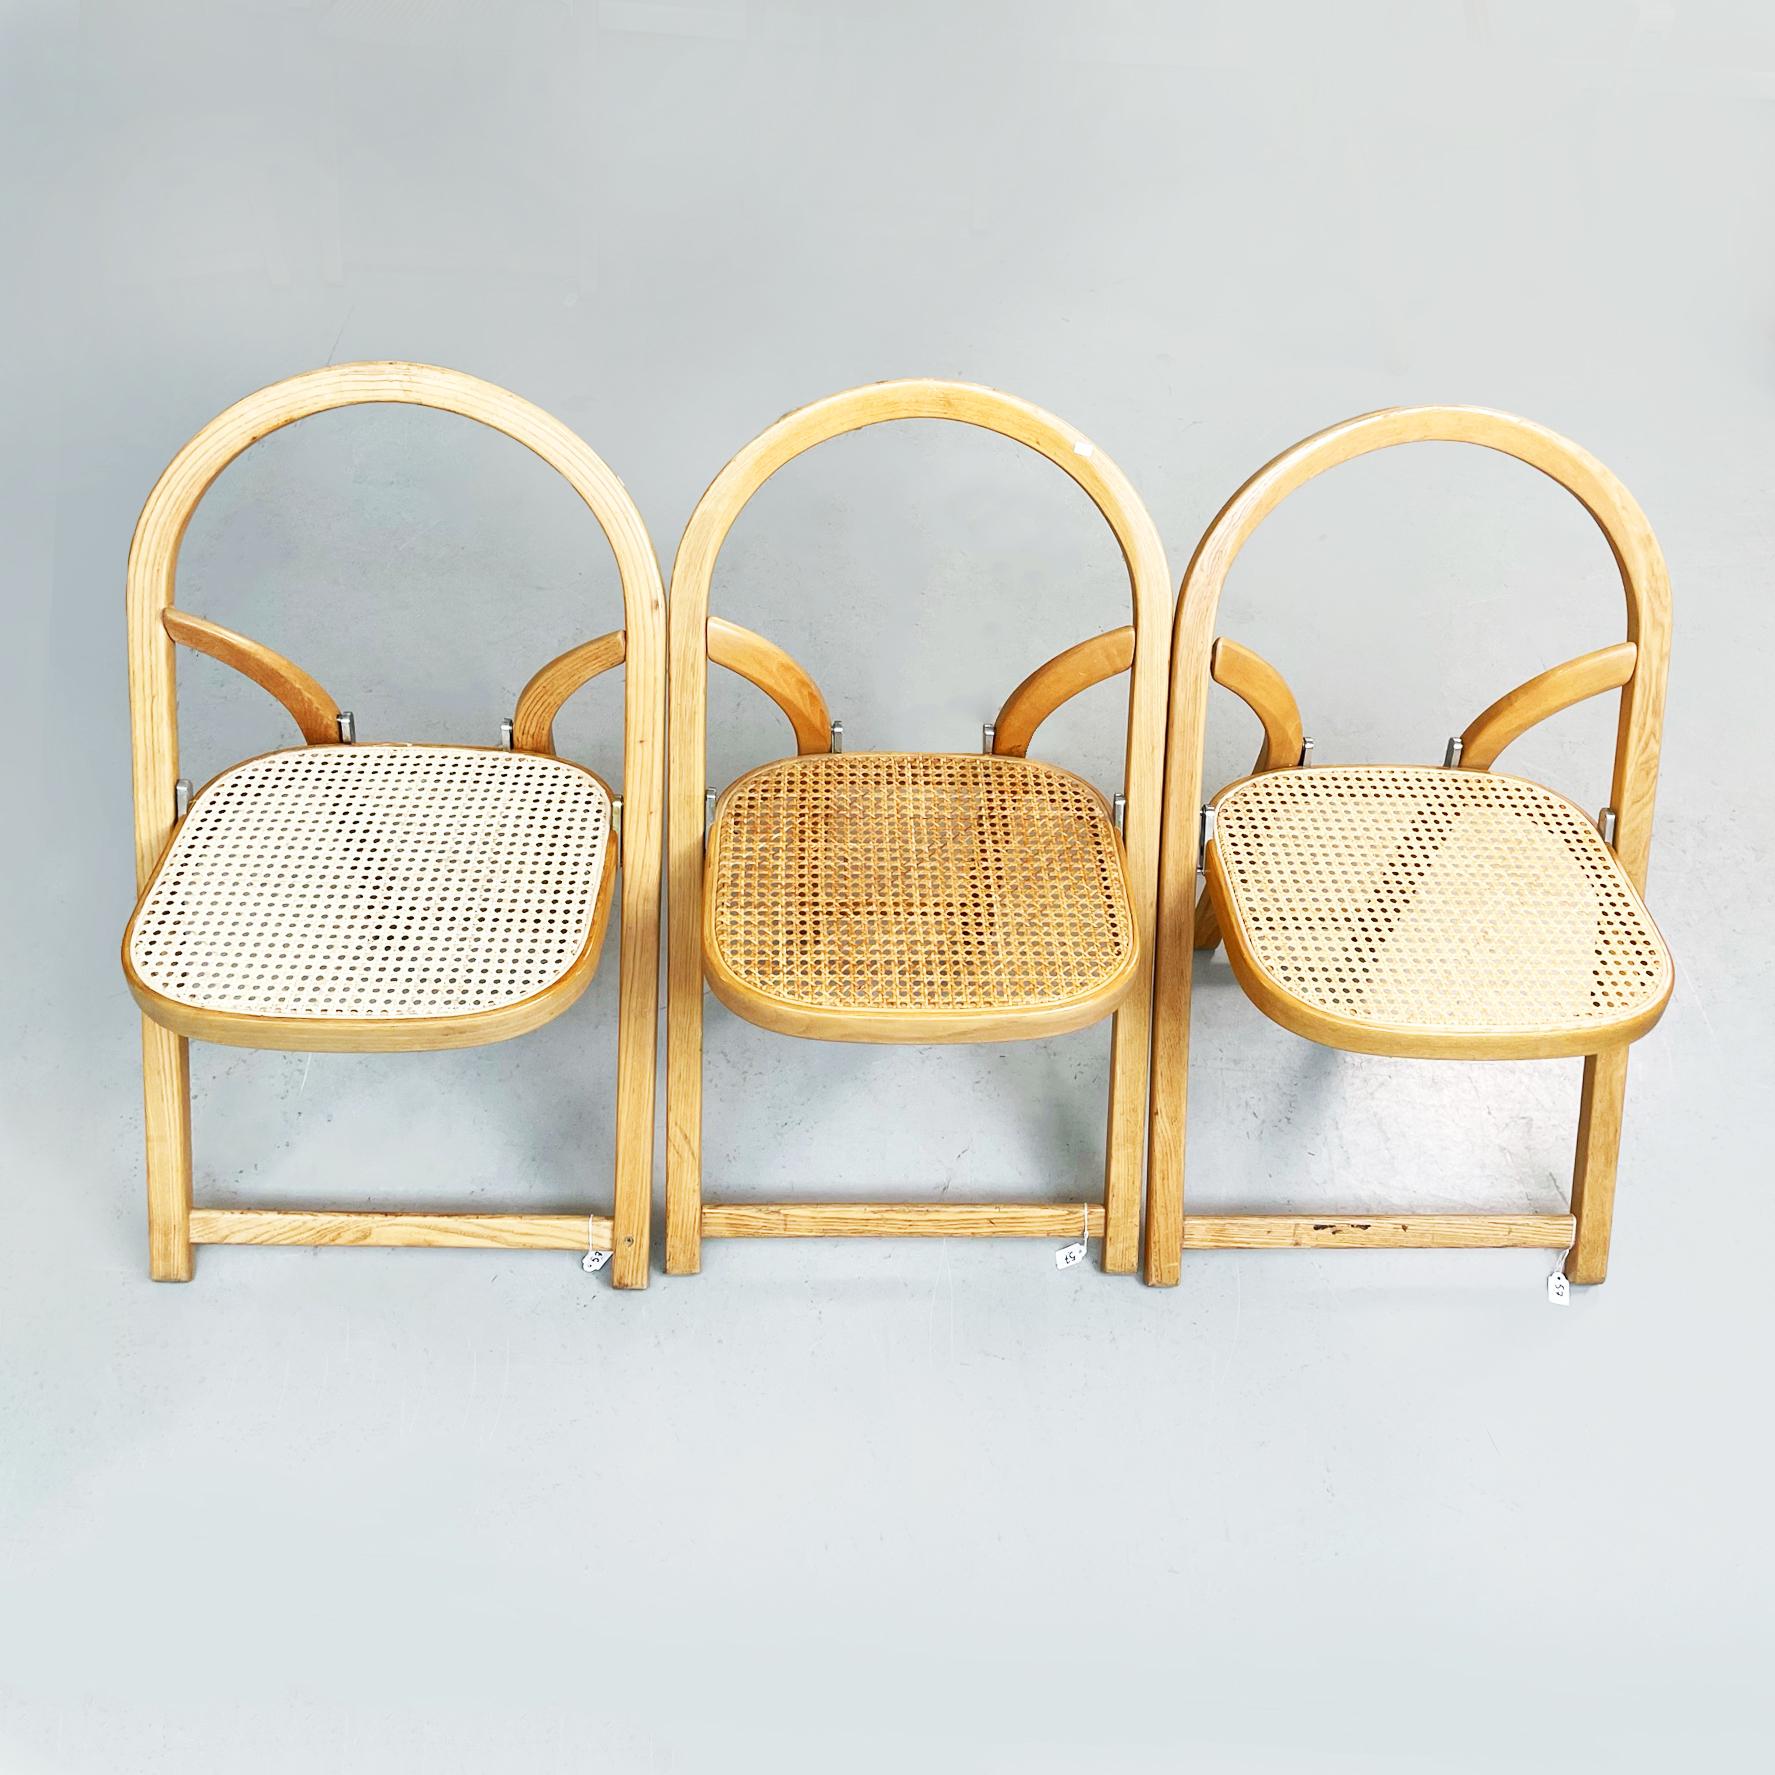 Late 20th Century Italian Mid-Century Straw and Wooden Arca Chairs by Sabadin for Crassevig, 1970s